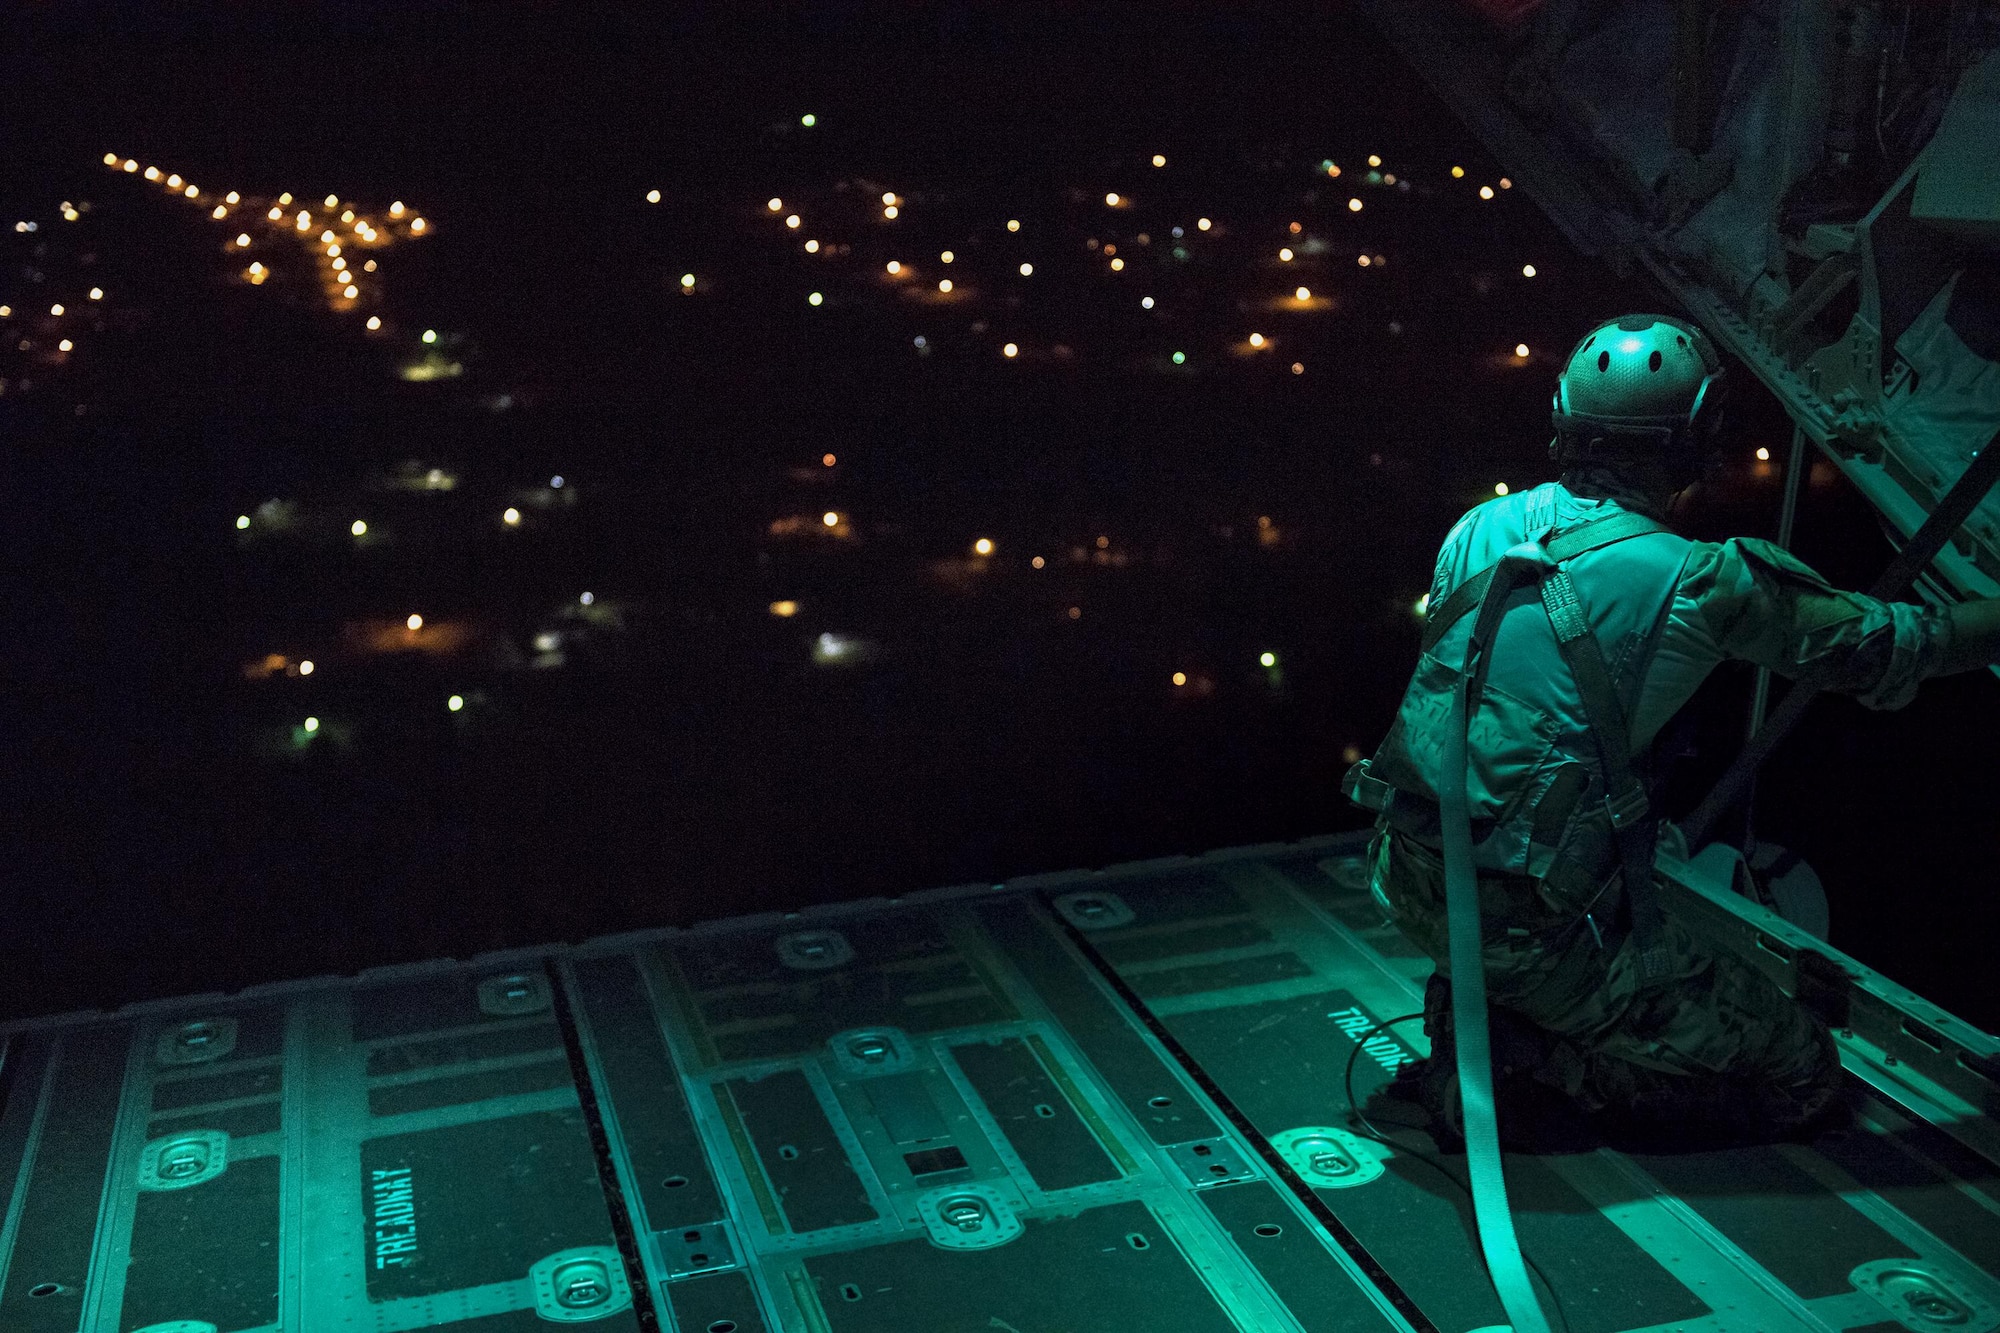 A pararescueman from the 38th Rescue Squadron scans the drop zone from the back of an HC-130J Combat King II prior to static-line jumps, April 24, 2017, at Moody Air Force Base, Ga. All PJs are qualified to conduct both static-line and High altitude, low opening jumps. During a static-line jump, the jumper is attached to the aircraft via the ‘static-line’, which automatically deploys the jumpers’ parachute after they’ve exited the aircraft. (U.S. Air Force photo by Staff Sgt. Ryan Callaghan)